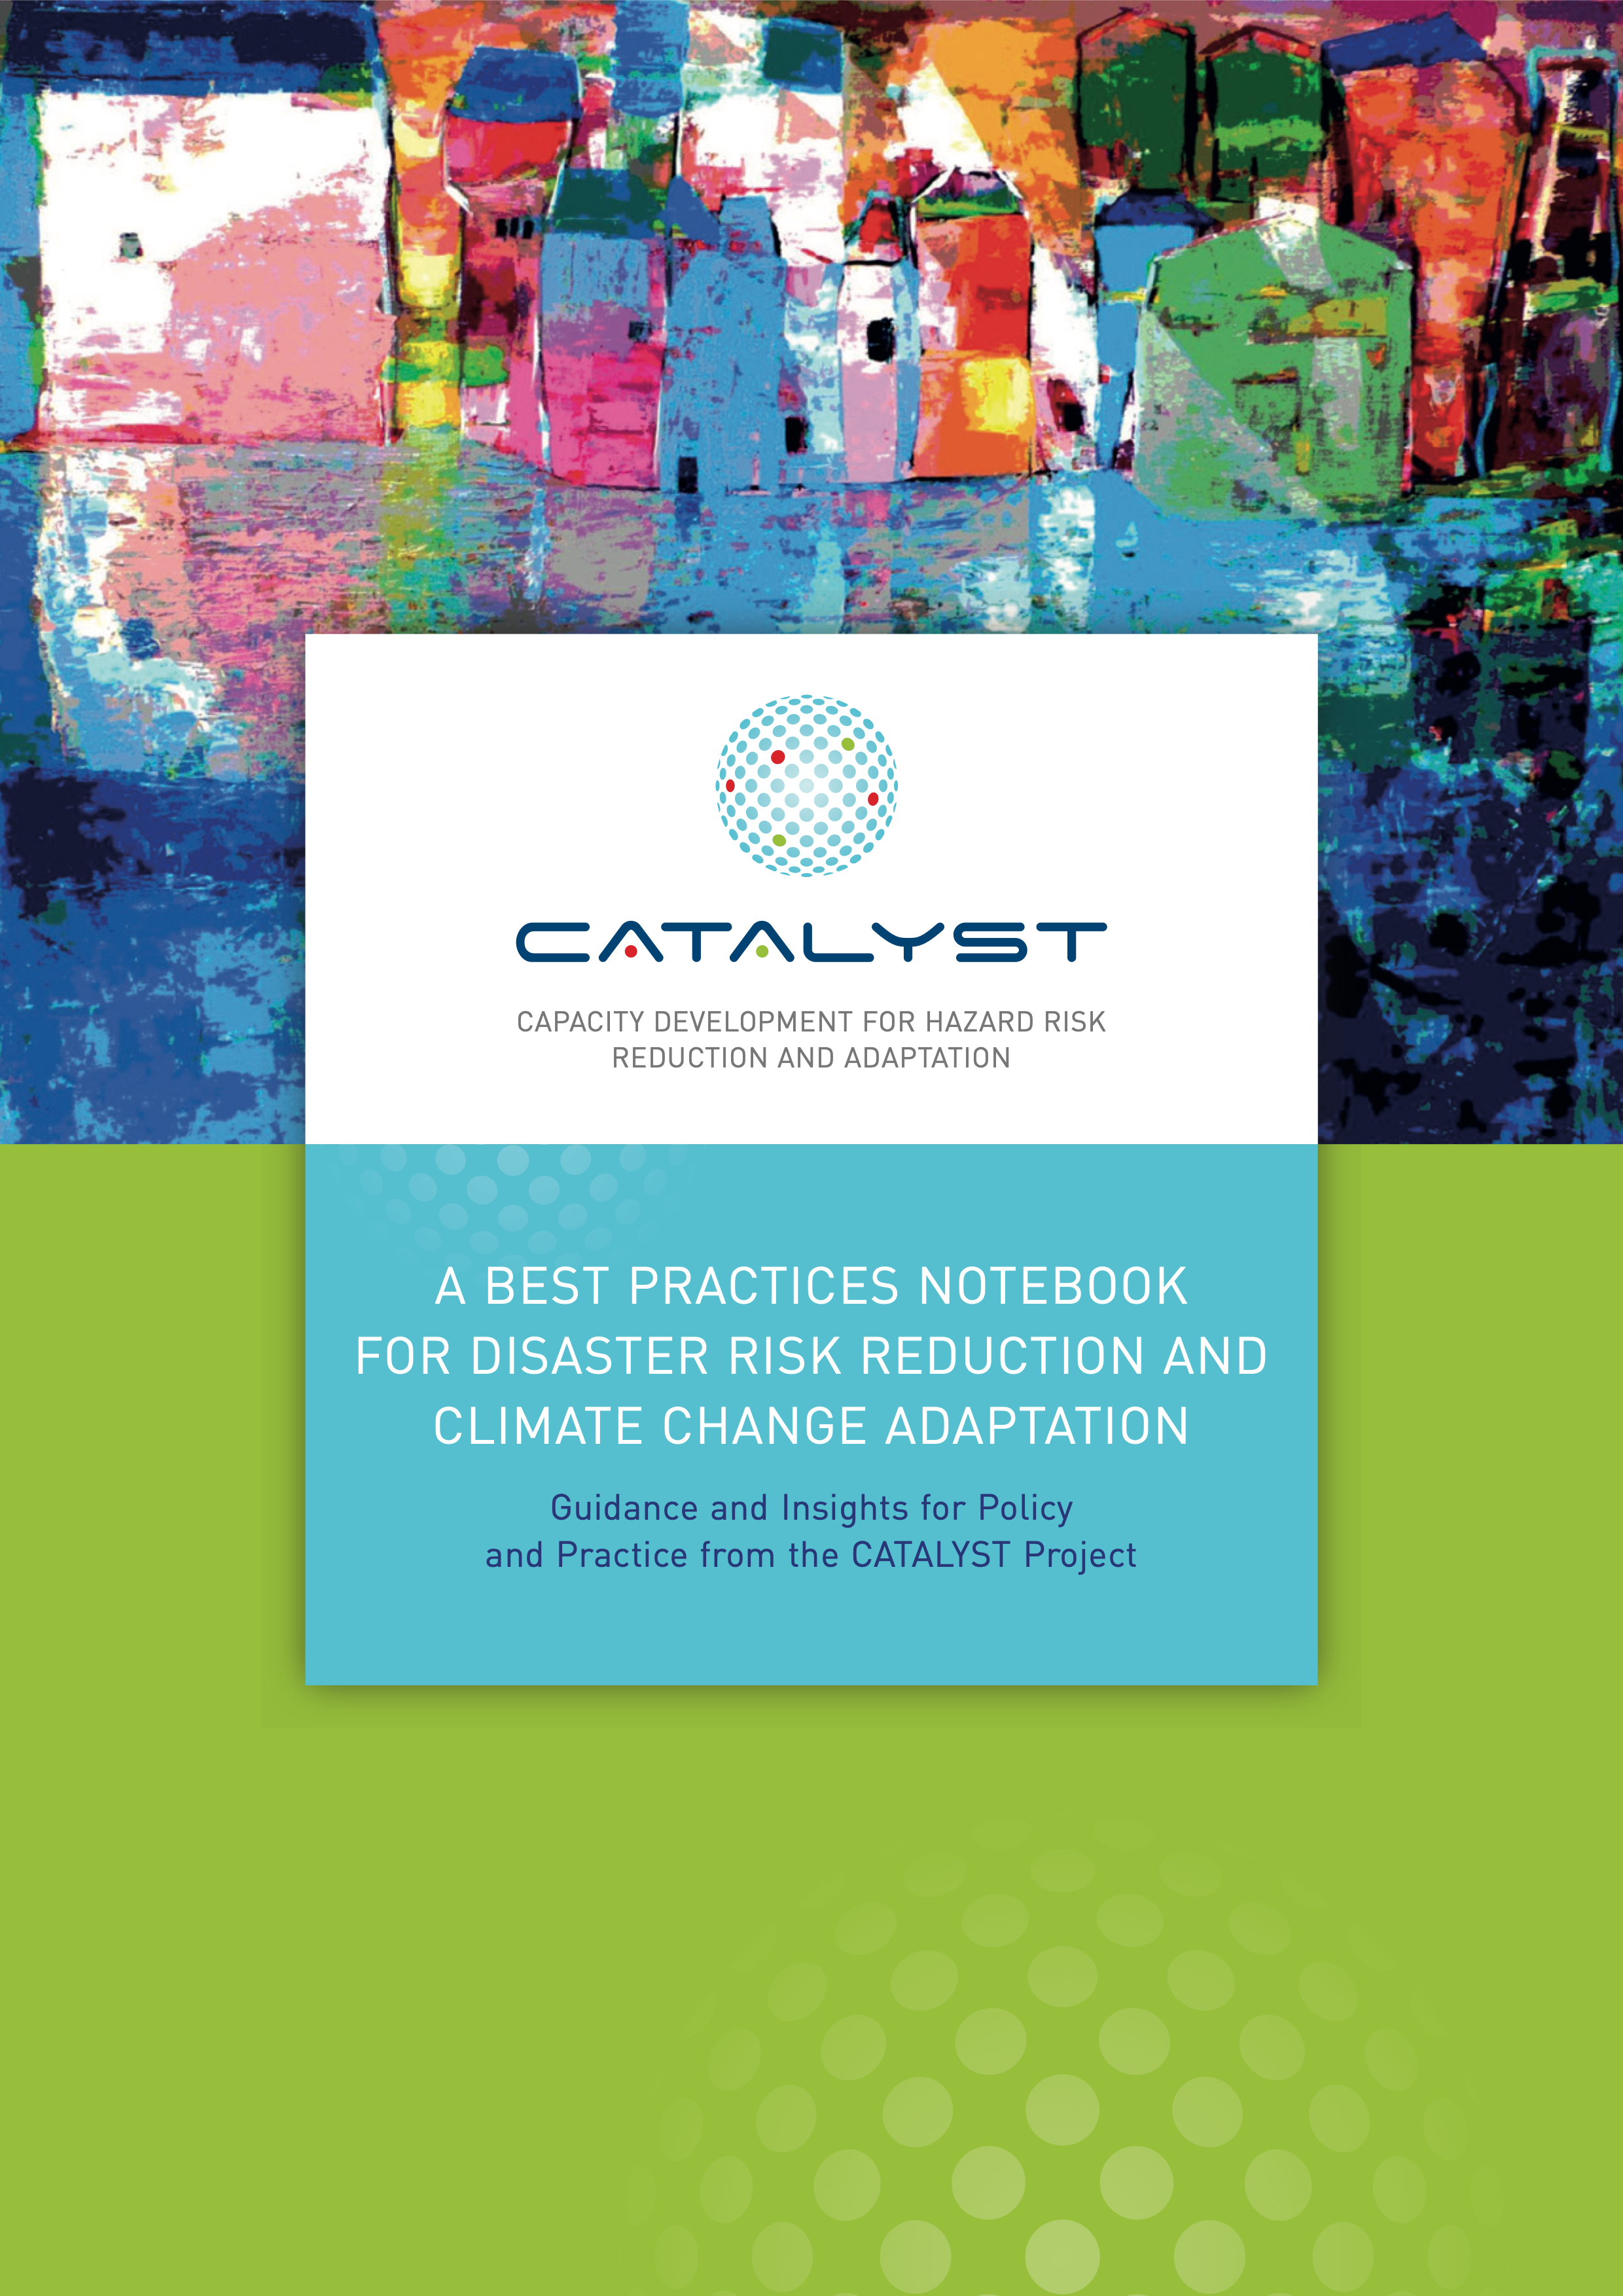 A Best Practices Notebook for Disaster Risk Reduction and Climate Change Adaptation